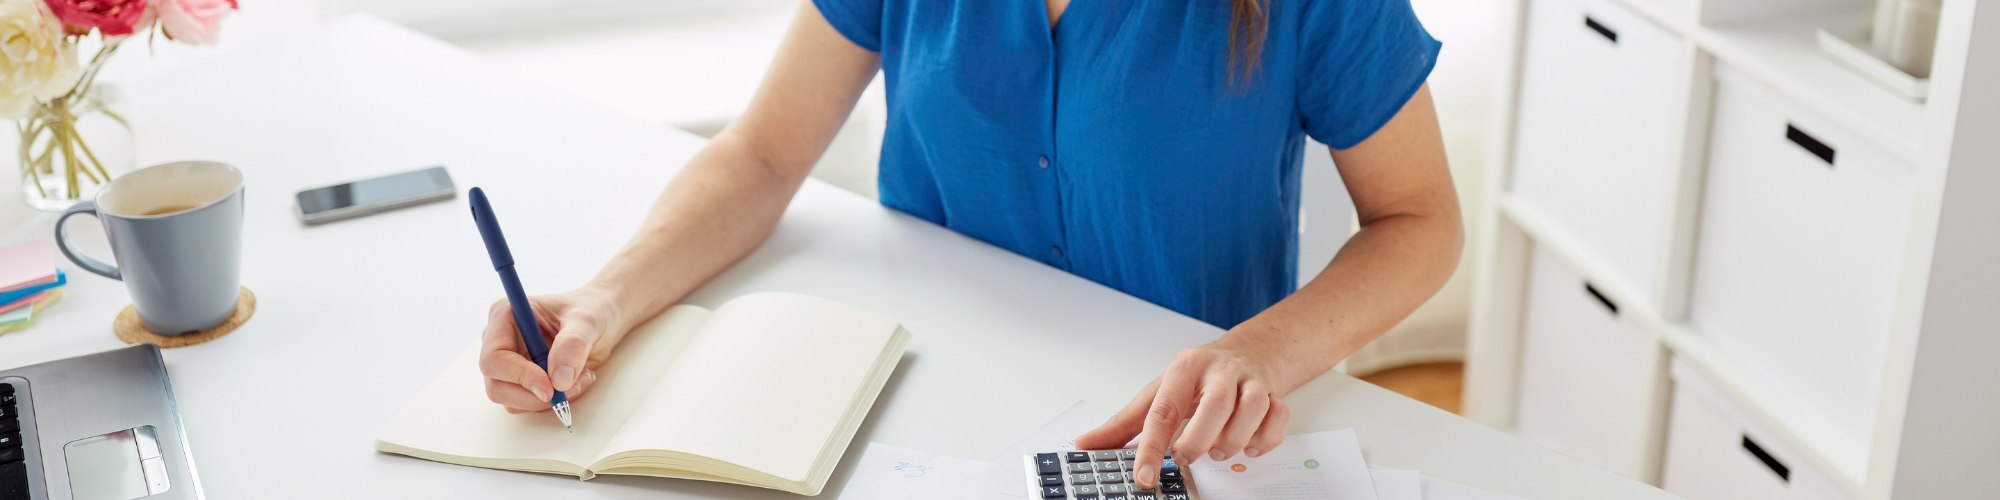 woman working on bookkeeping for a business 